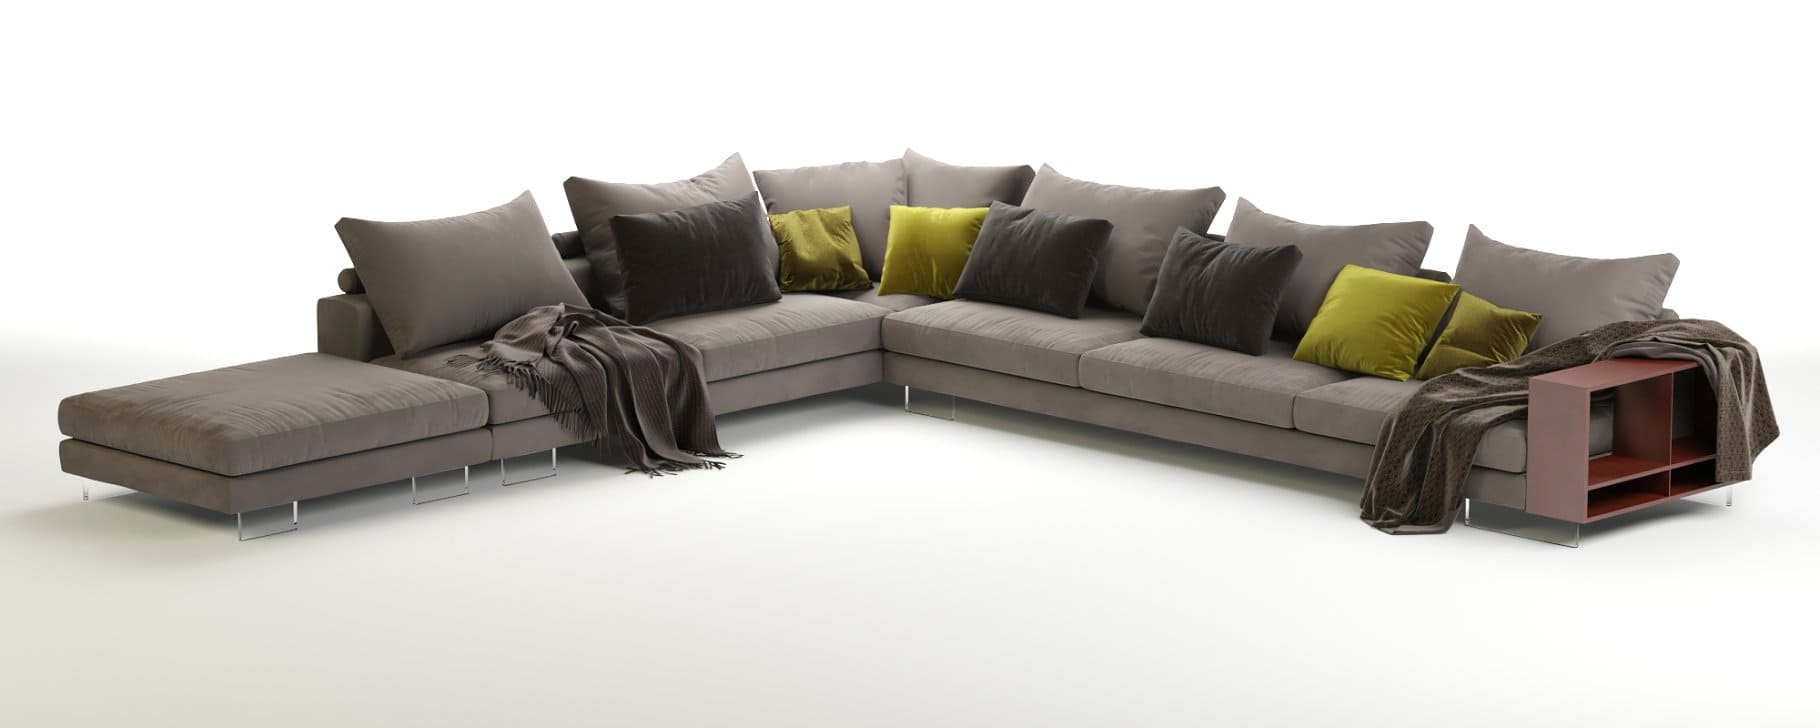 Light gray sofa with gray large pillows and dark gray and green small pillows.